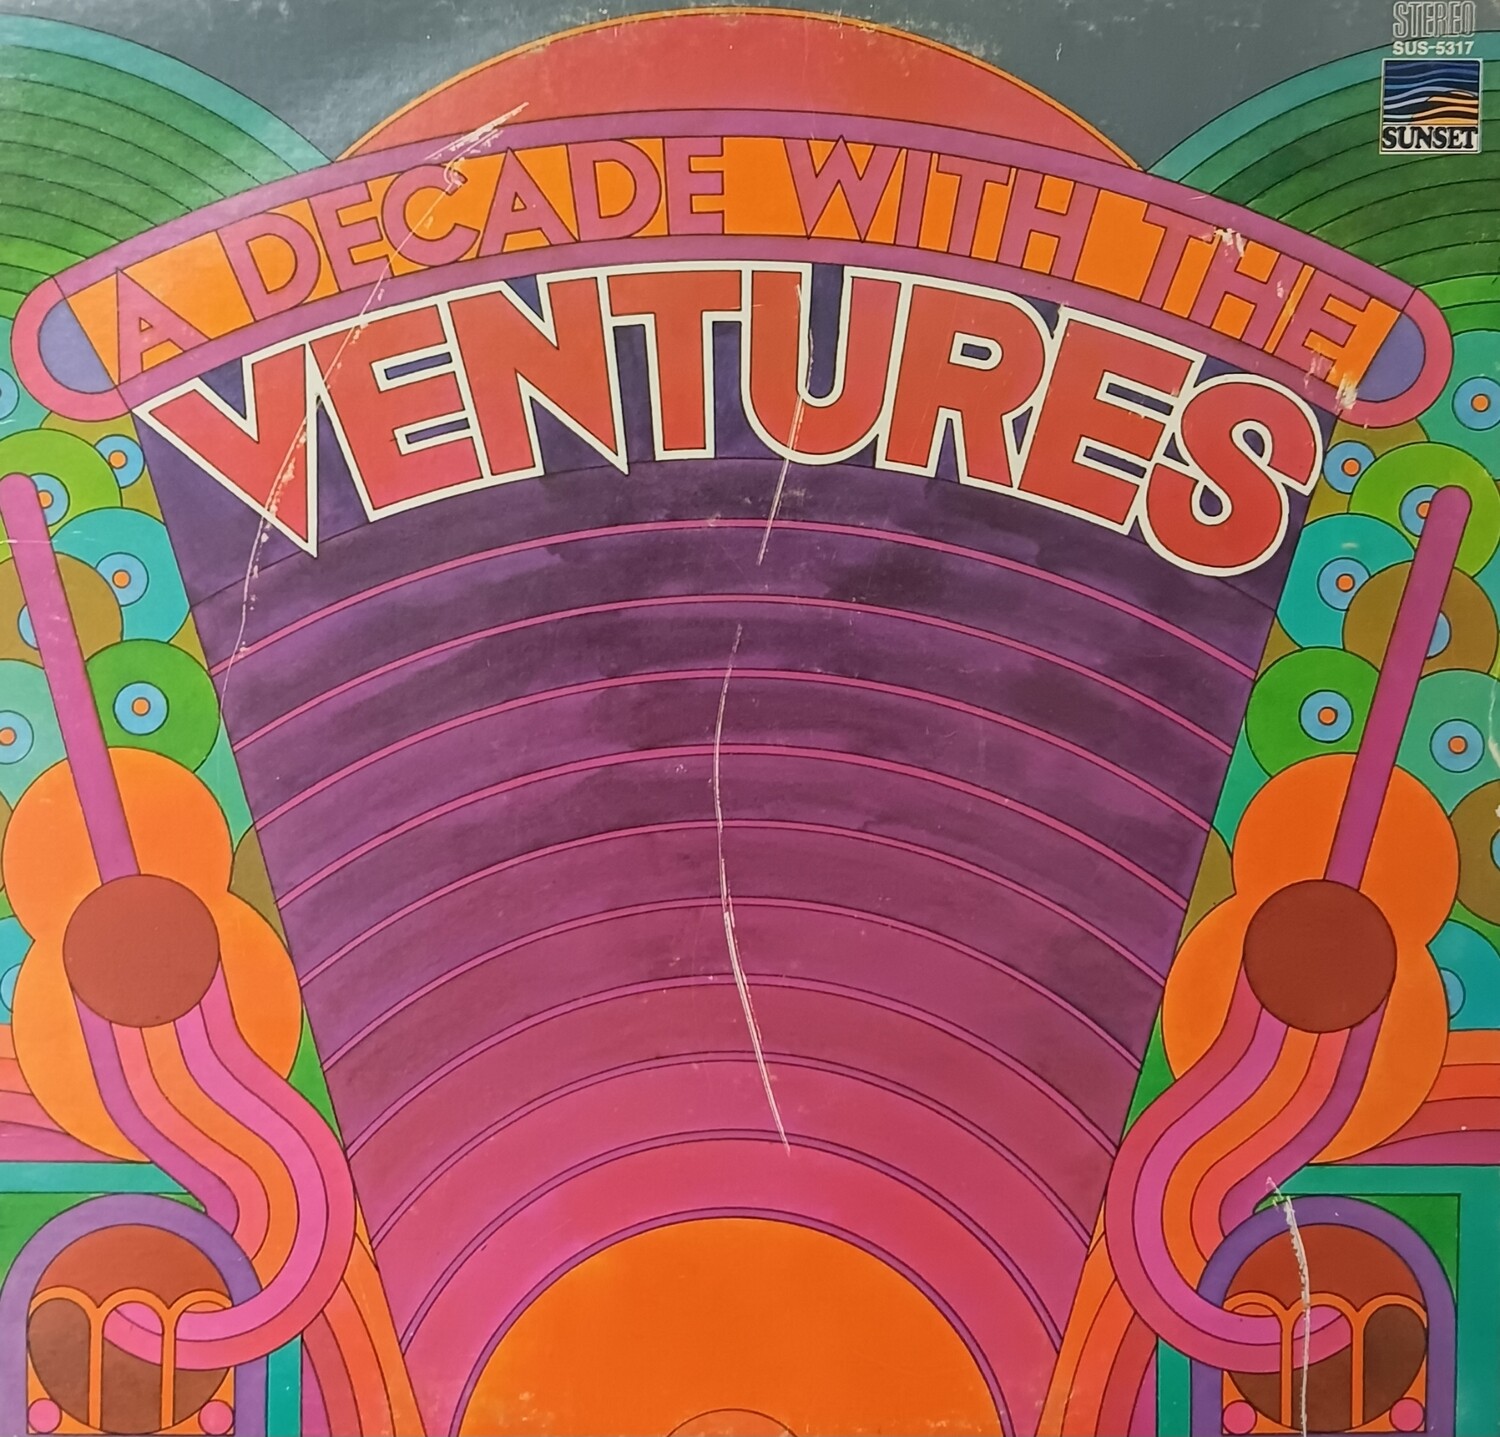 The Ventures - A decade with The Ventures